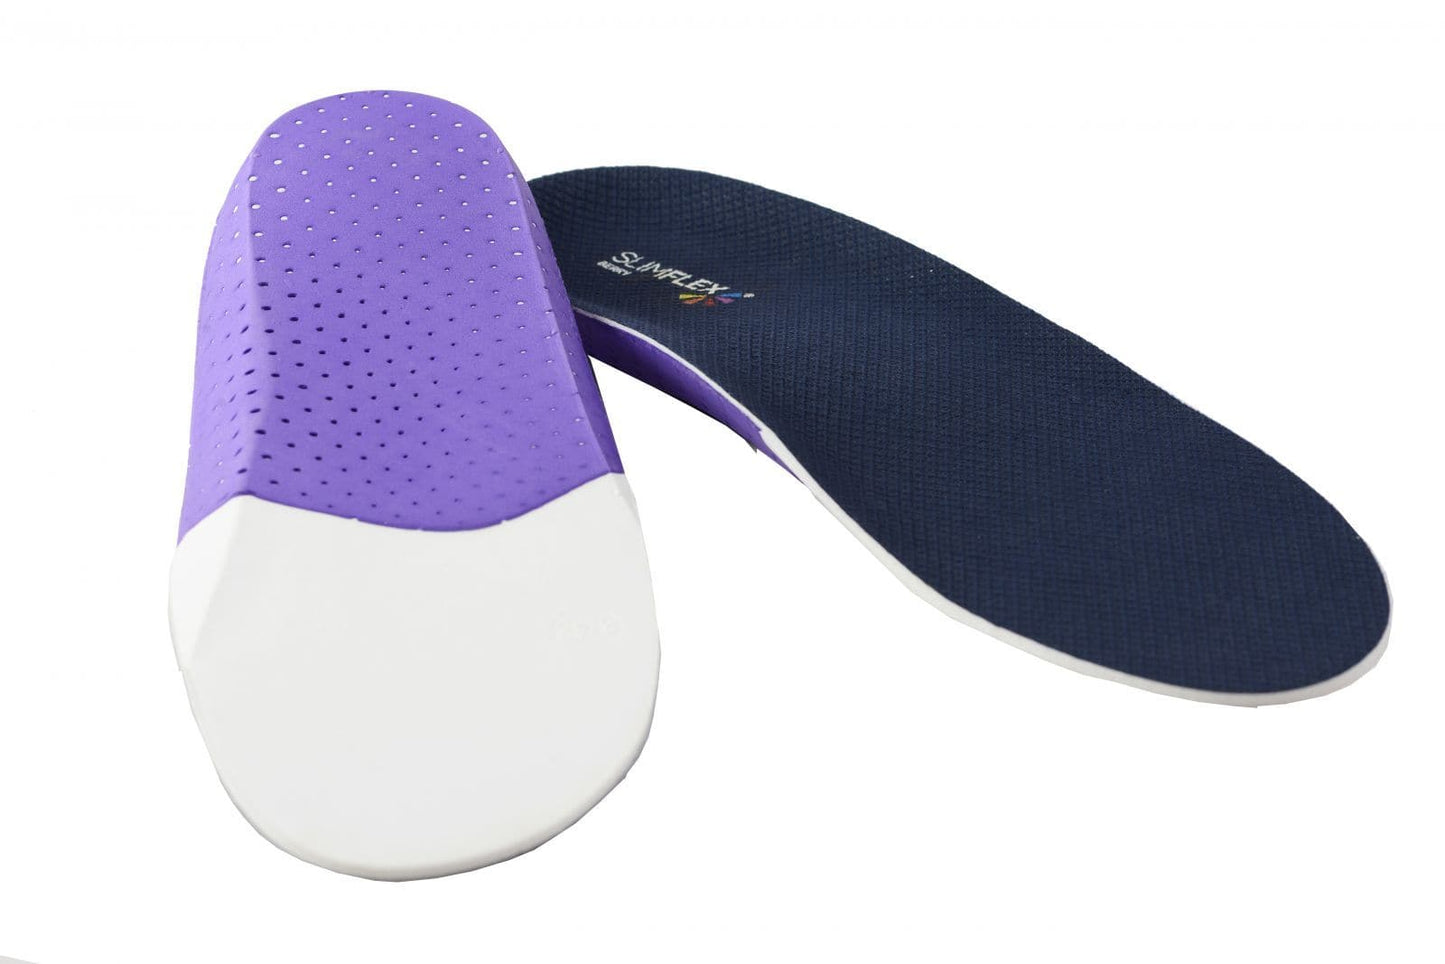 Slimflex Berry Foot Orthotic Insole - 9 for 9